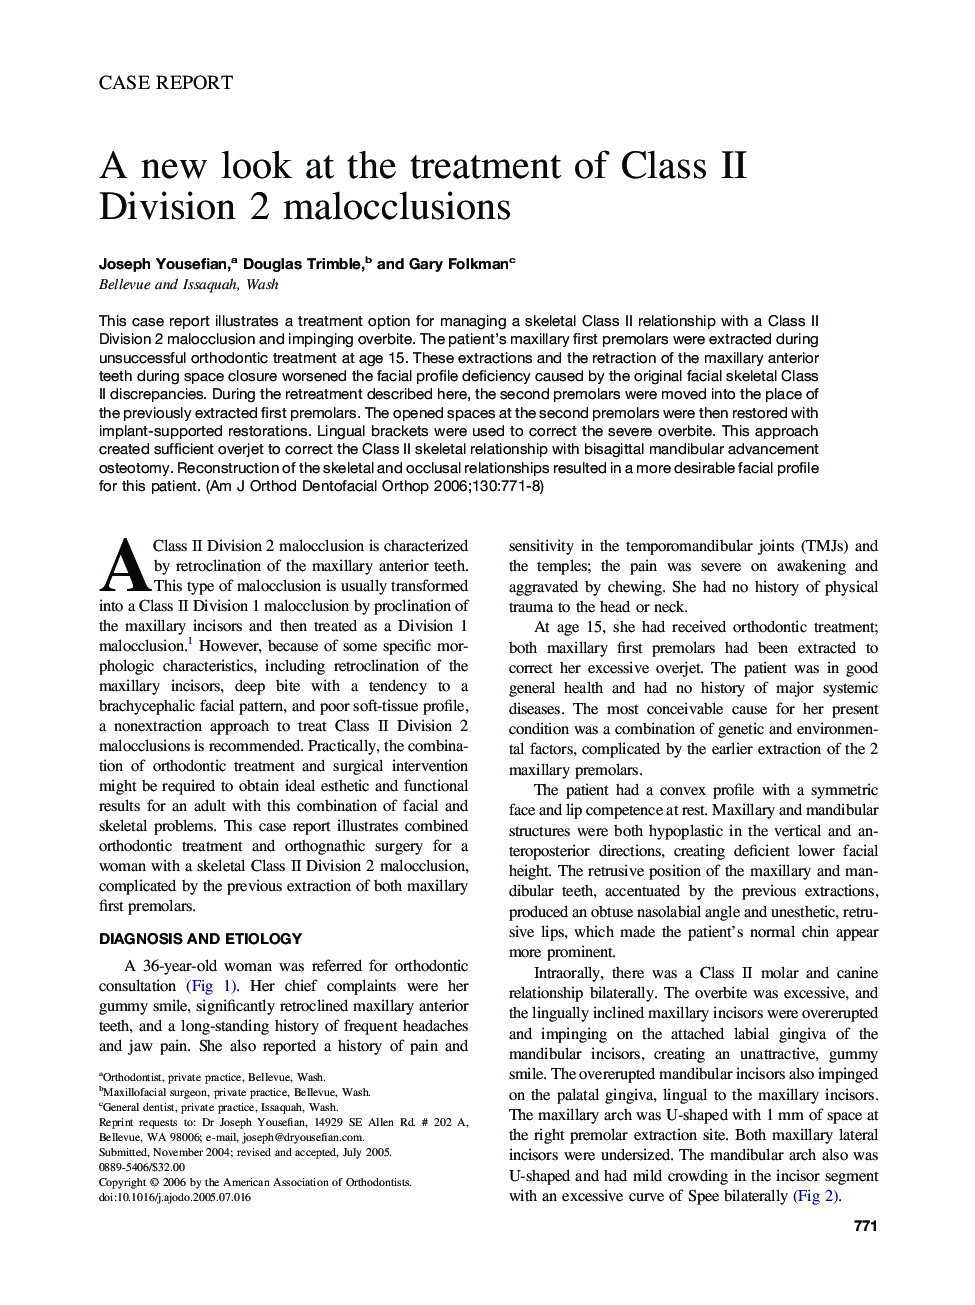 A new look at the treatment of Class II Division 2 malocclusions